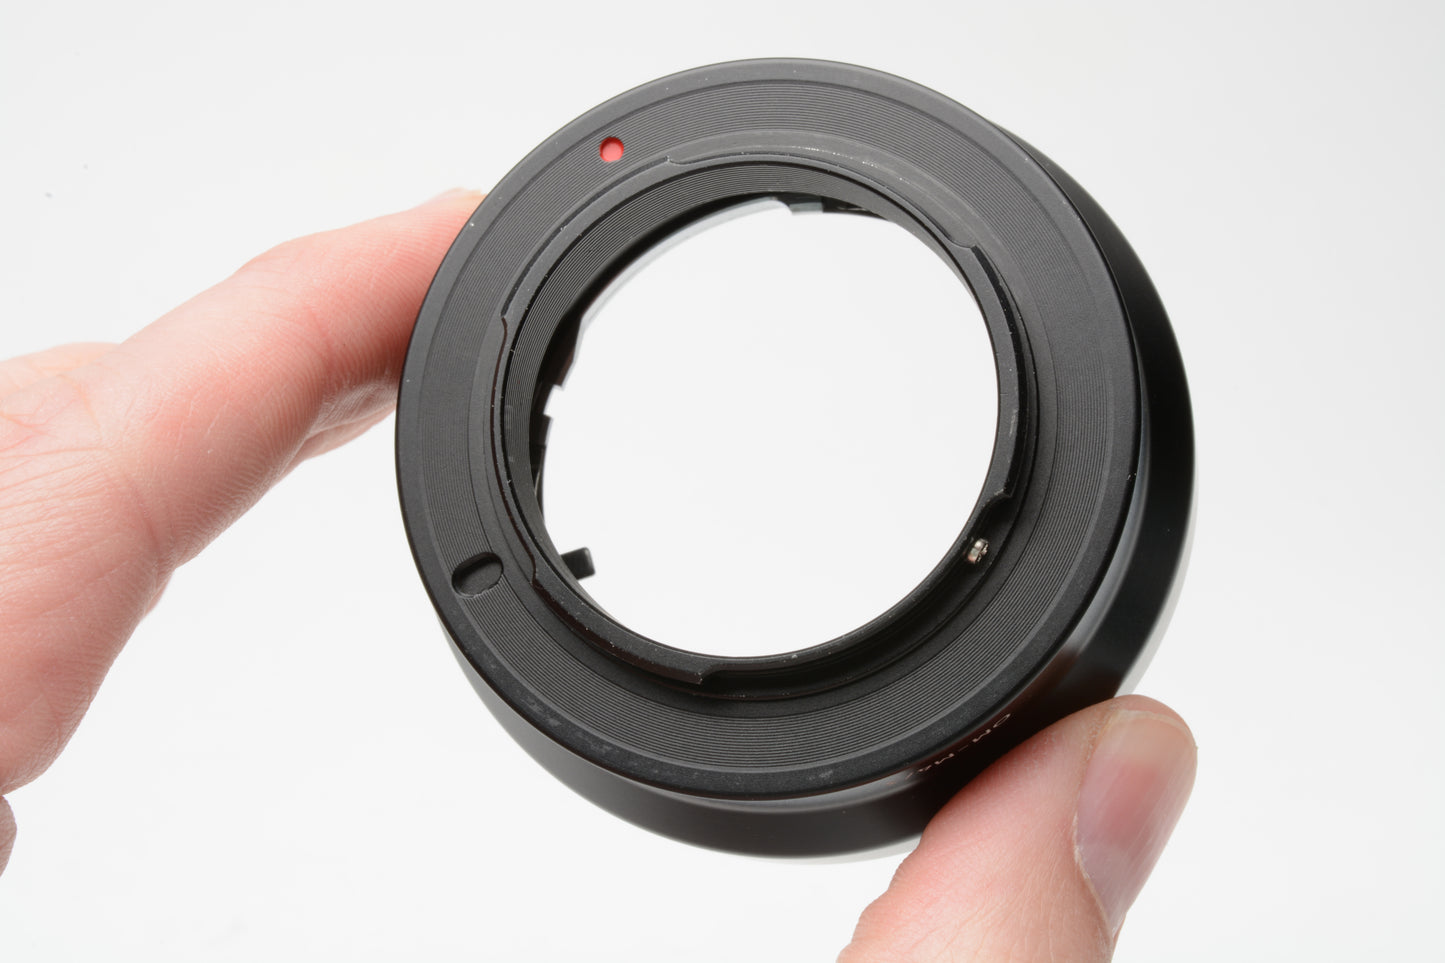 Urth all-metal lens mount adapter Olympus OM to Micro 4/3 Mount